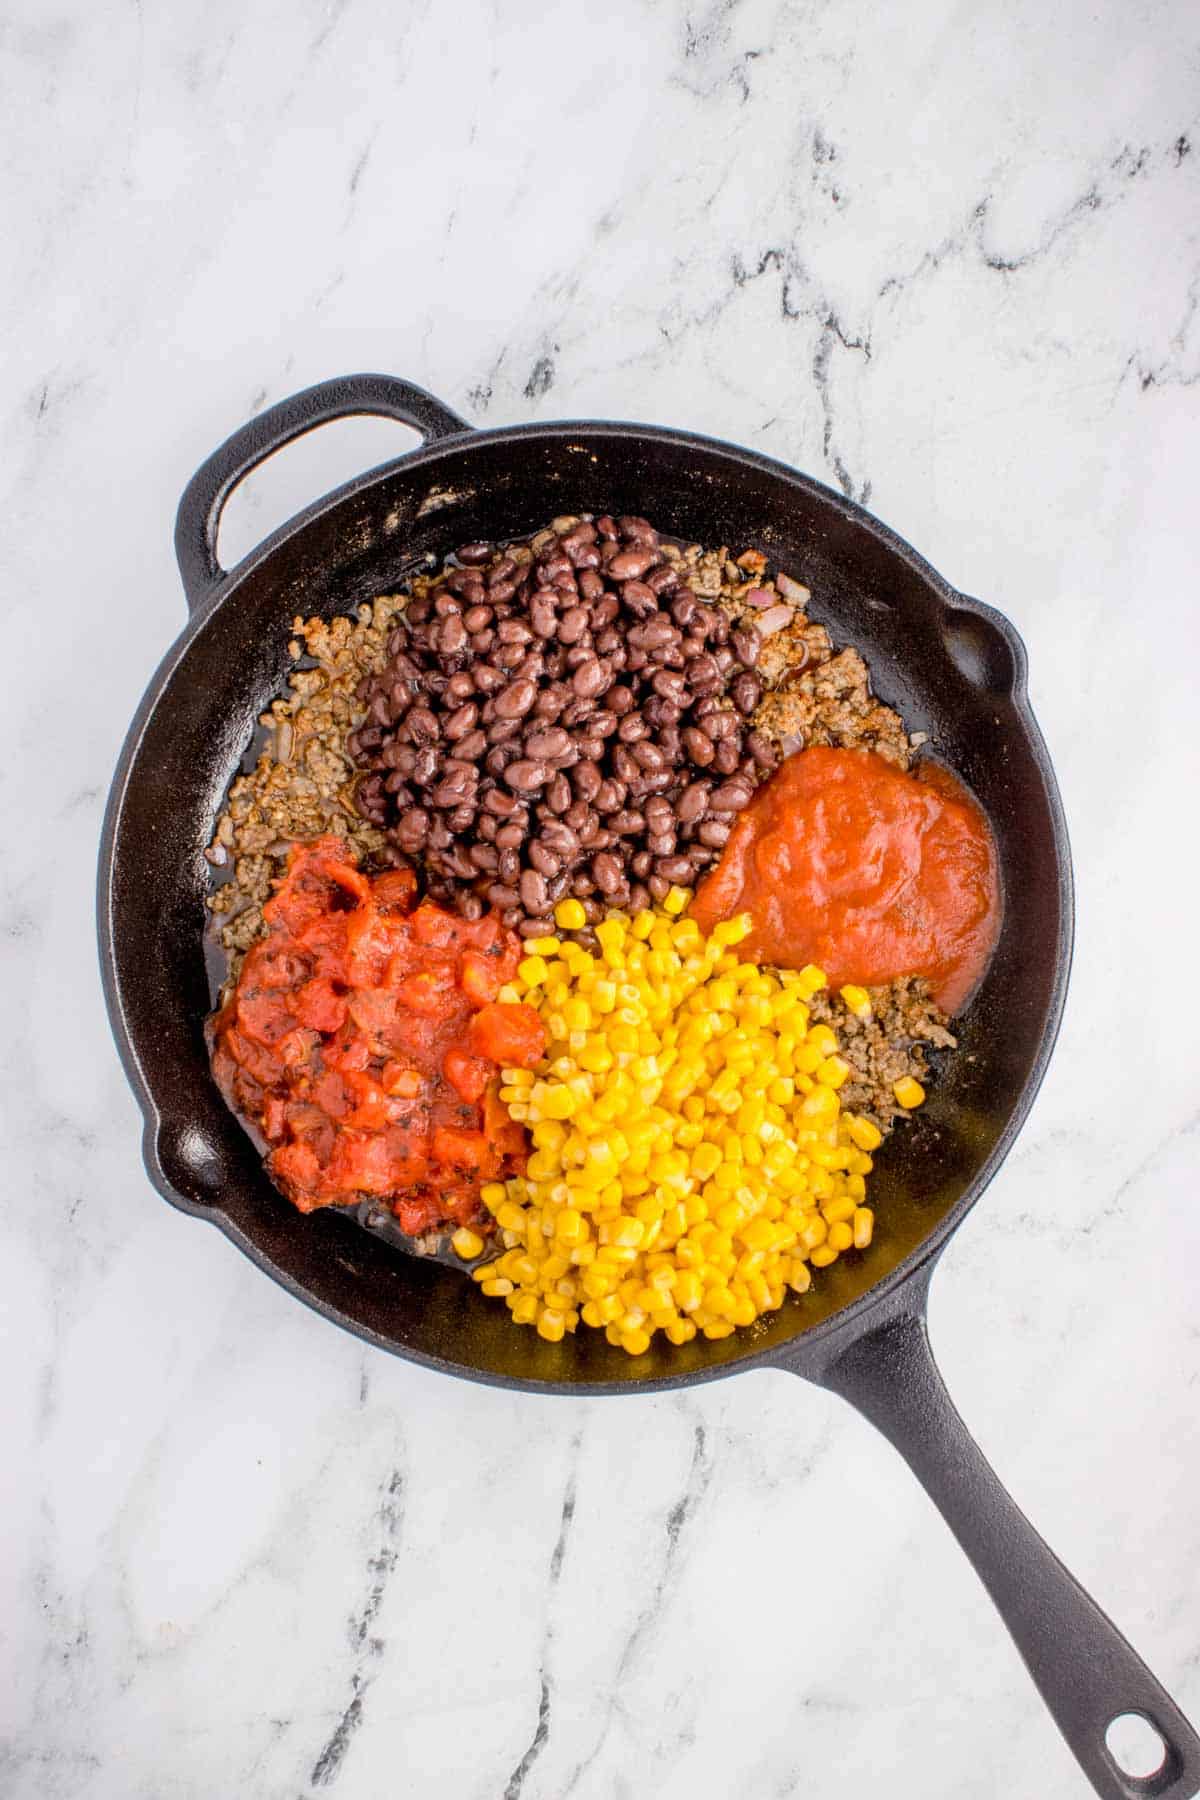 black beans, diced tomatoes, corn and tomato sauce on top of ground beef in a skillet